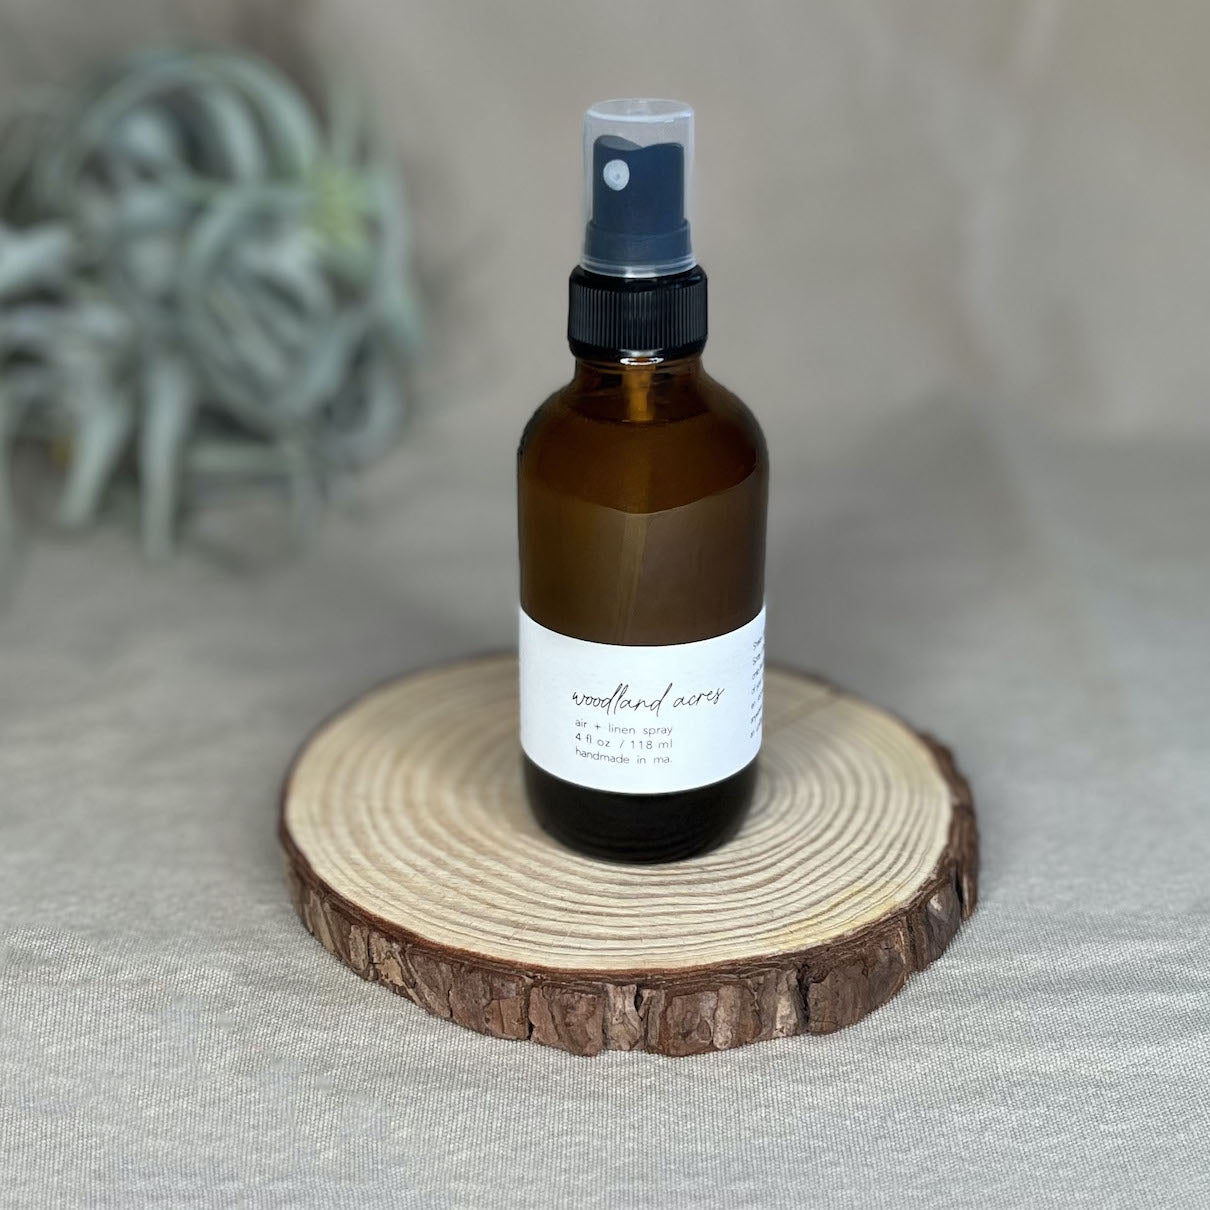 Fern x Flow natural and vegan Woodland Acres scented Air + Linen Spray.